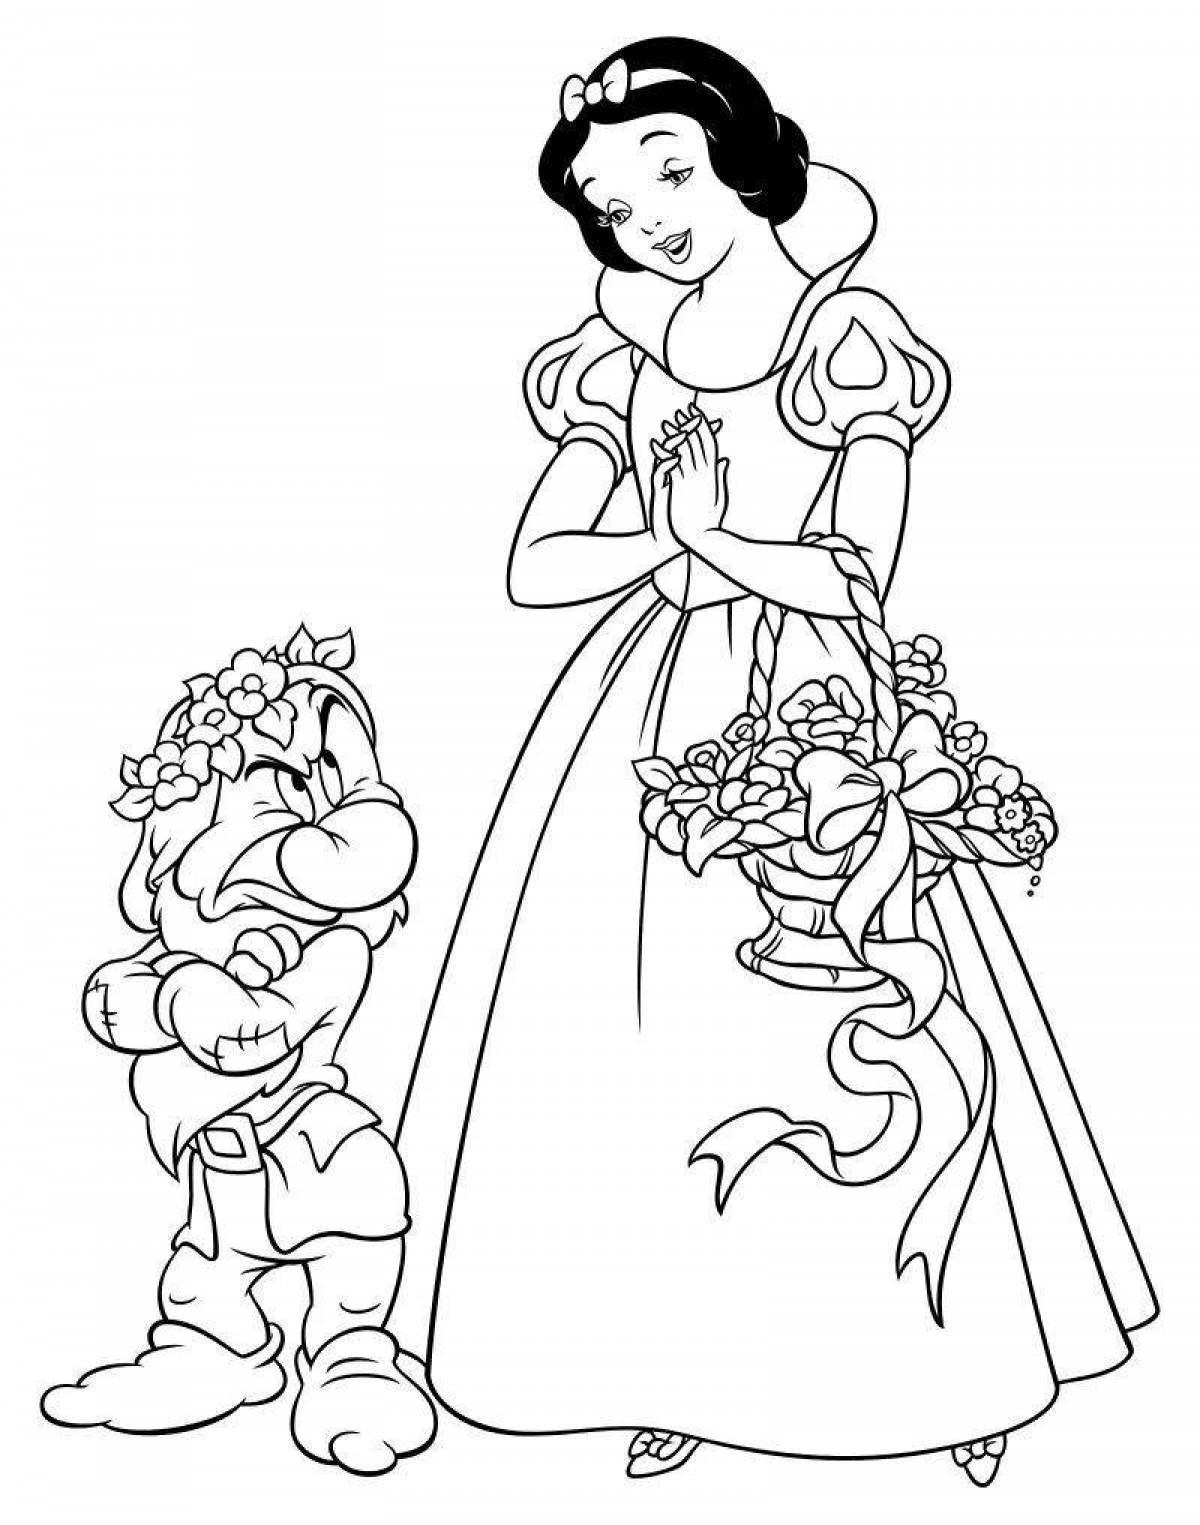 Magic snow white coloring for girls